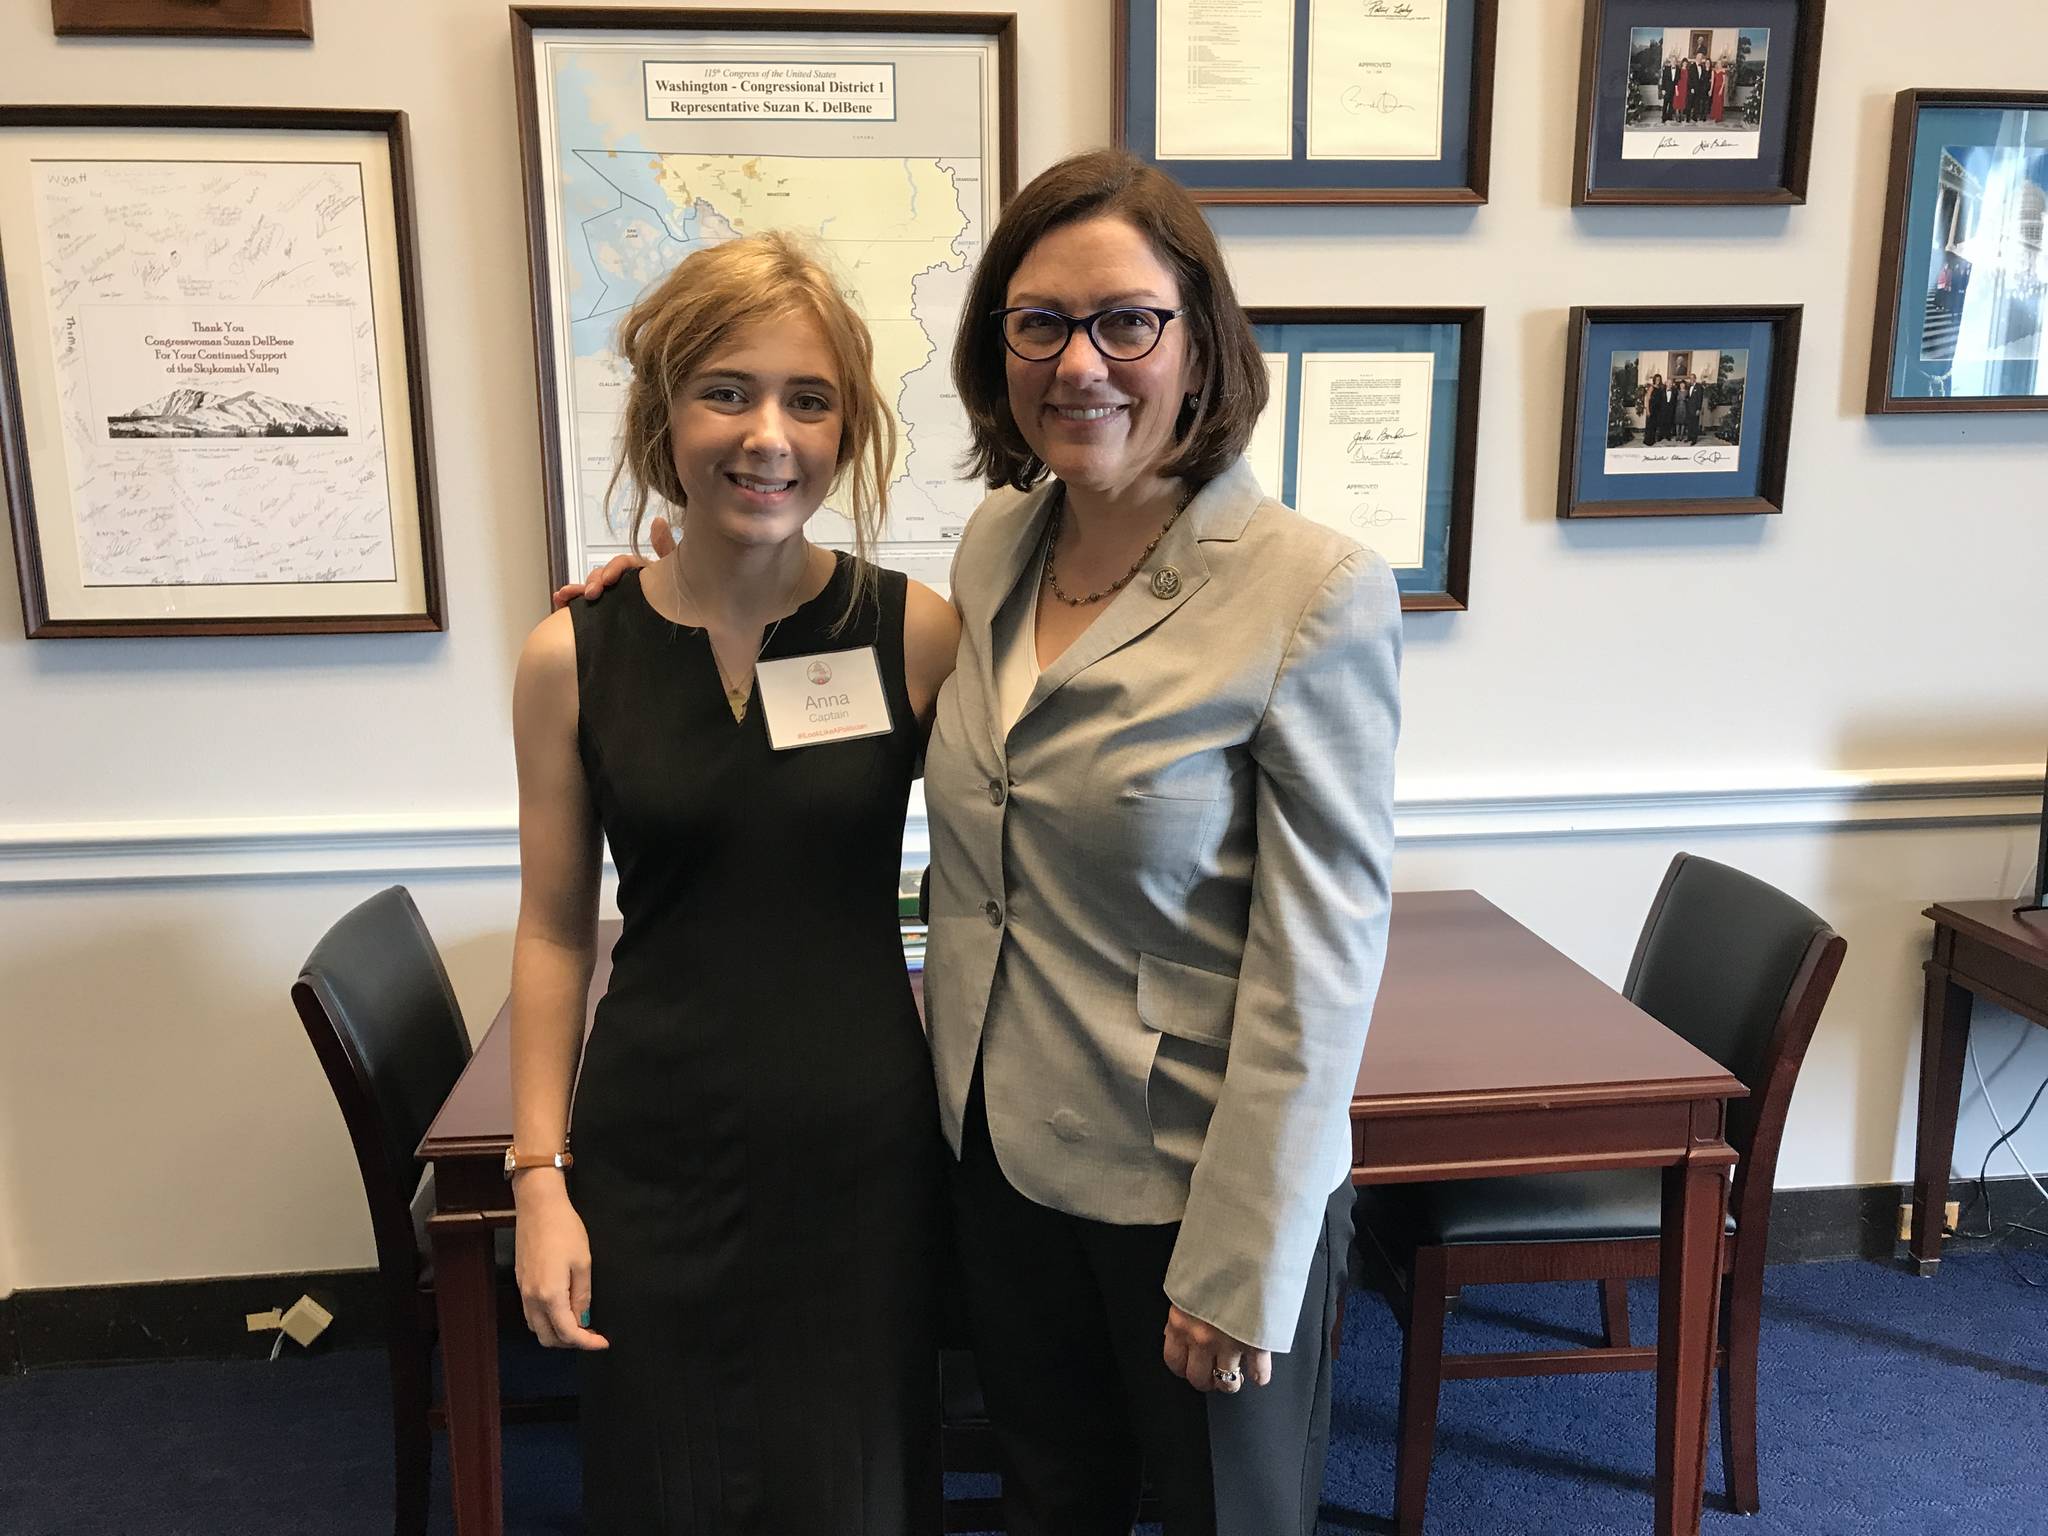 Anna Captain, left, met with Congresswoman Suzan DelBene on her trip to Washington, D.C. earlier this summer. Contributed by Anna Captain